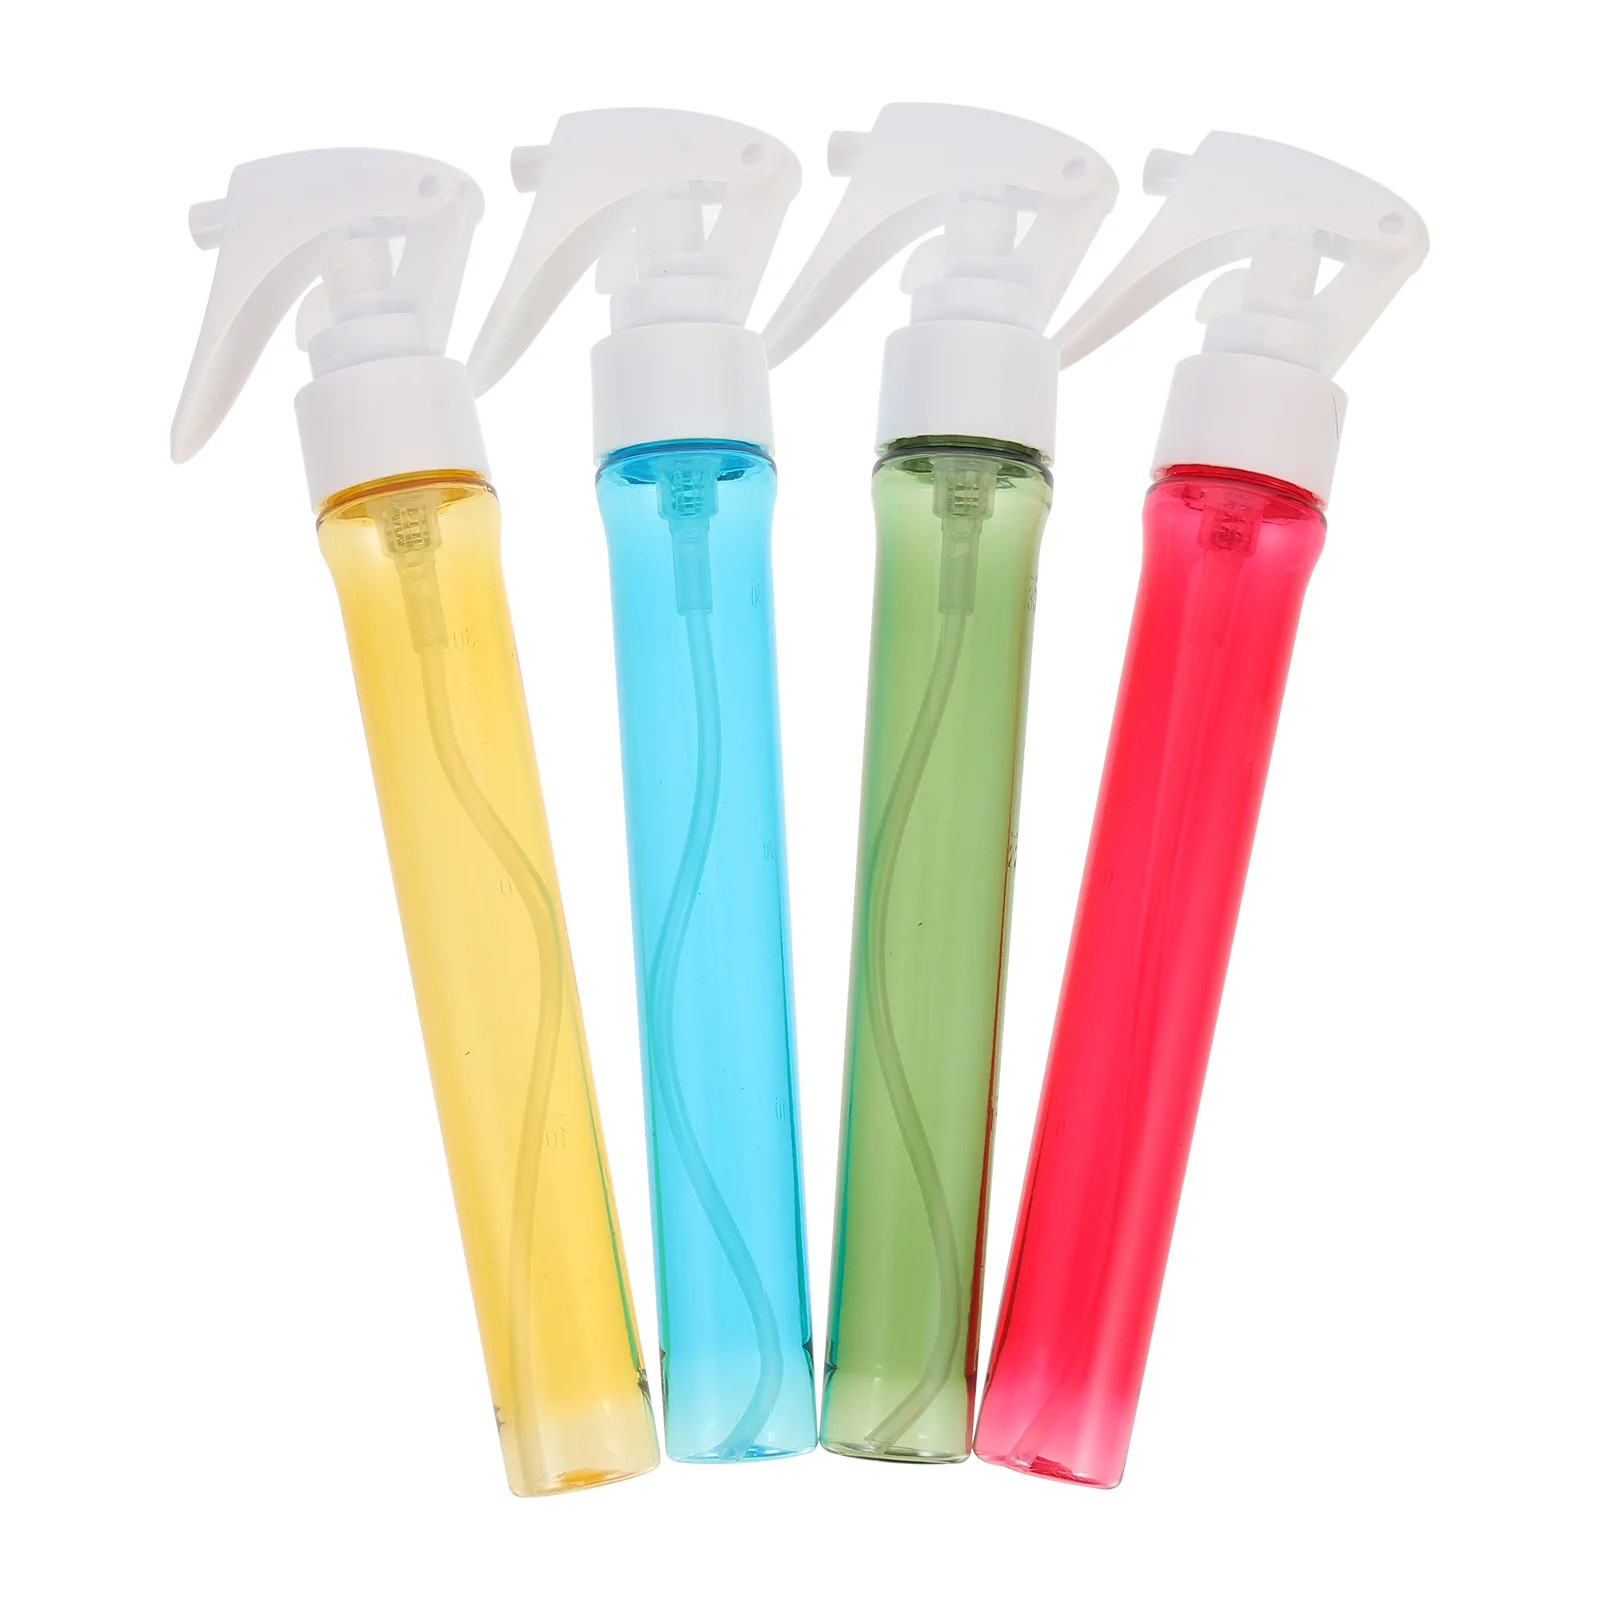 4 Pcs Watering Can Spray Thumb Spraying Cans Refillable Household The Pet Hand Press Pot